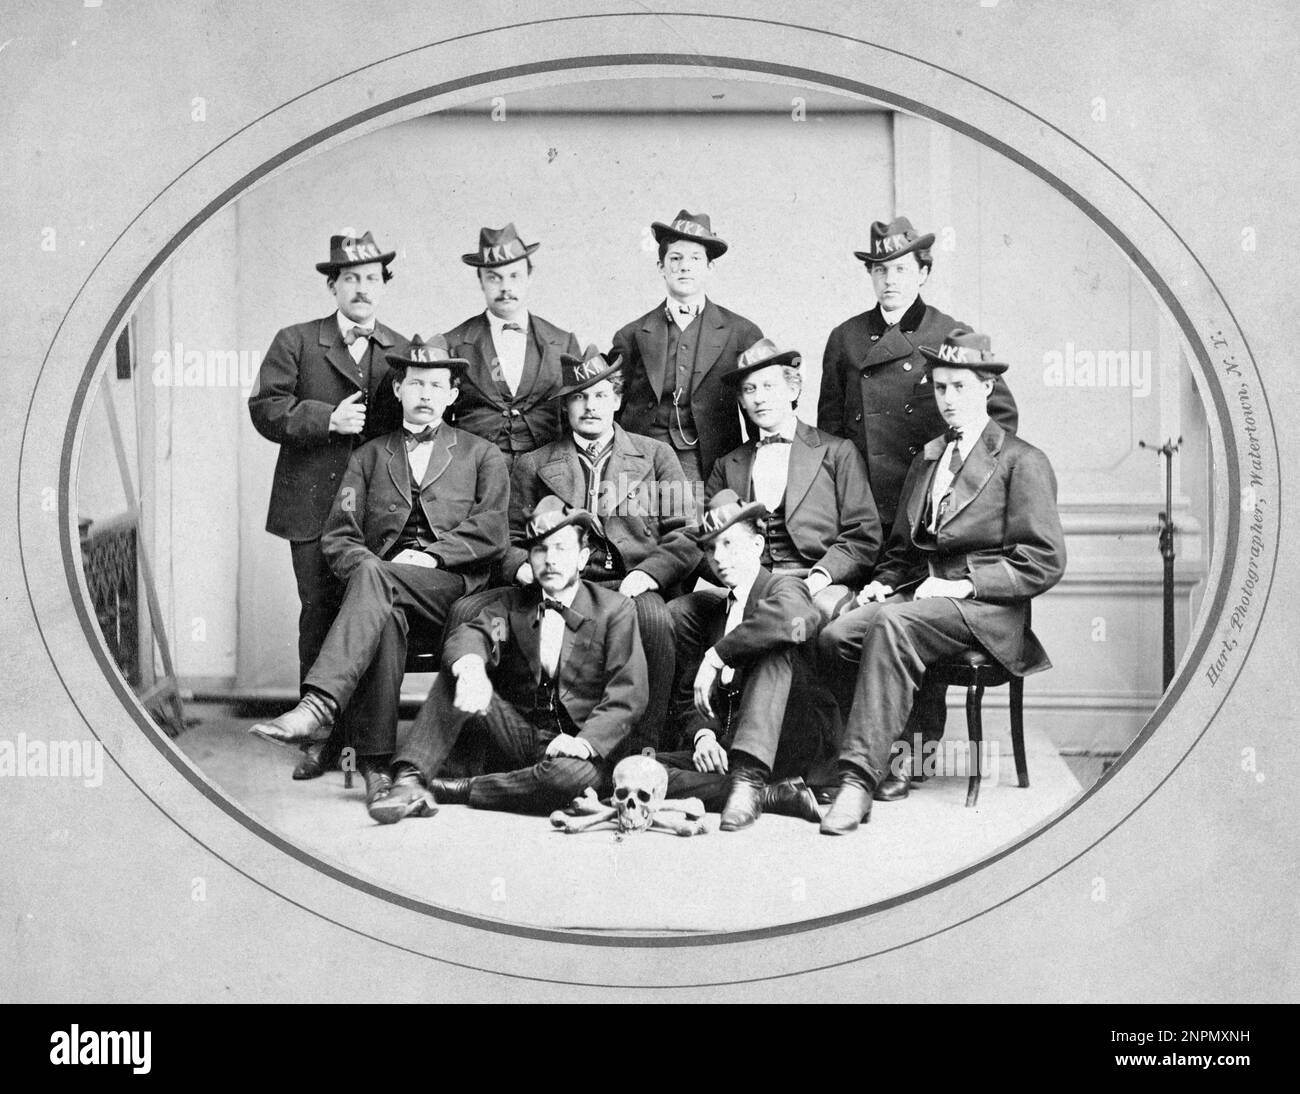 Ku Klux Klan, Watertown Division 289, Watertown, N.Y.   c1870. Ten men posed seated and standing, wearing hats with 'KKK' in large letters, and with a skull and bones arranged on the floor in front of them. Stock Photo